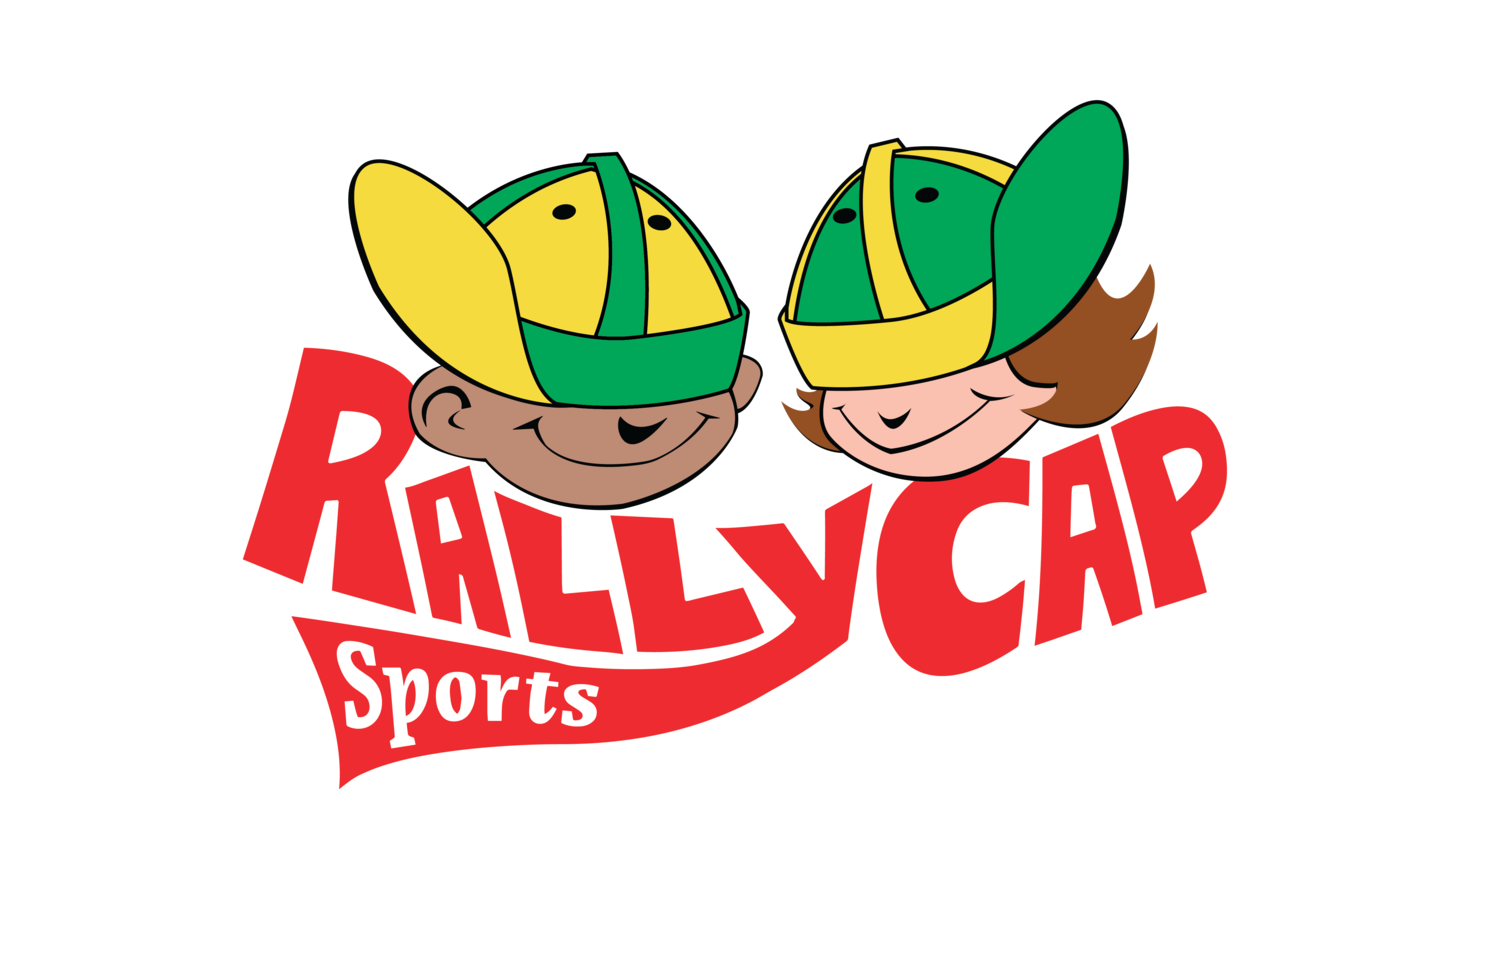 Our vision rallycap sports. Mission clipart healthy living